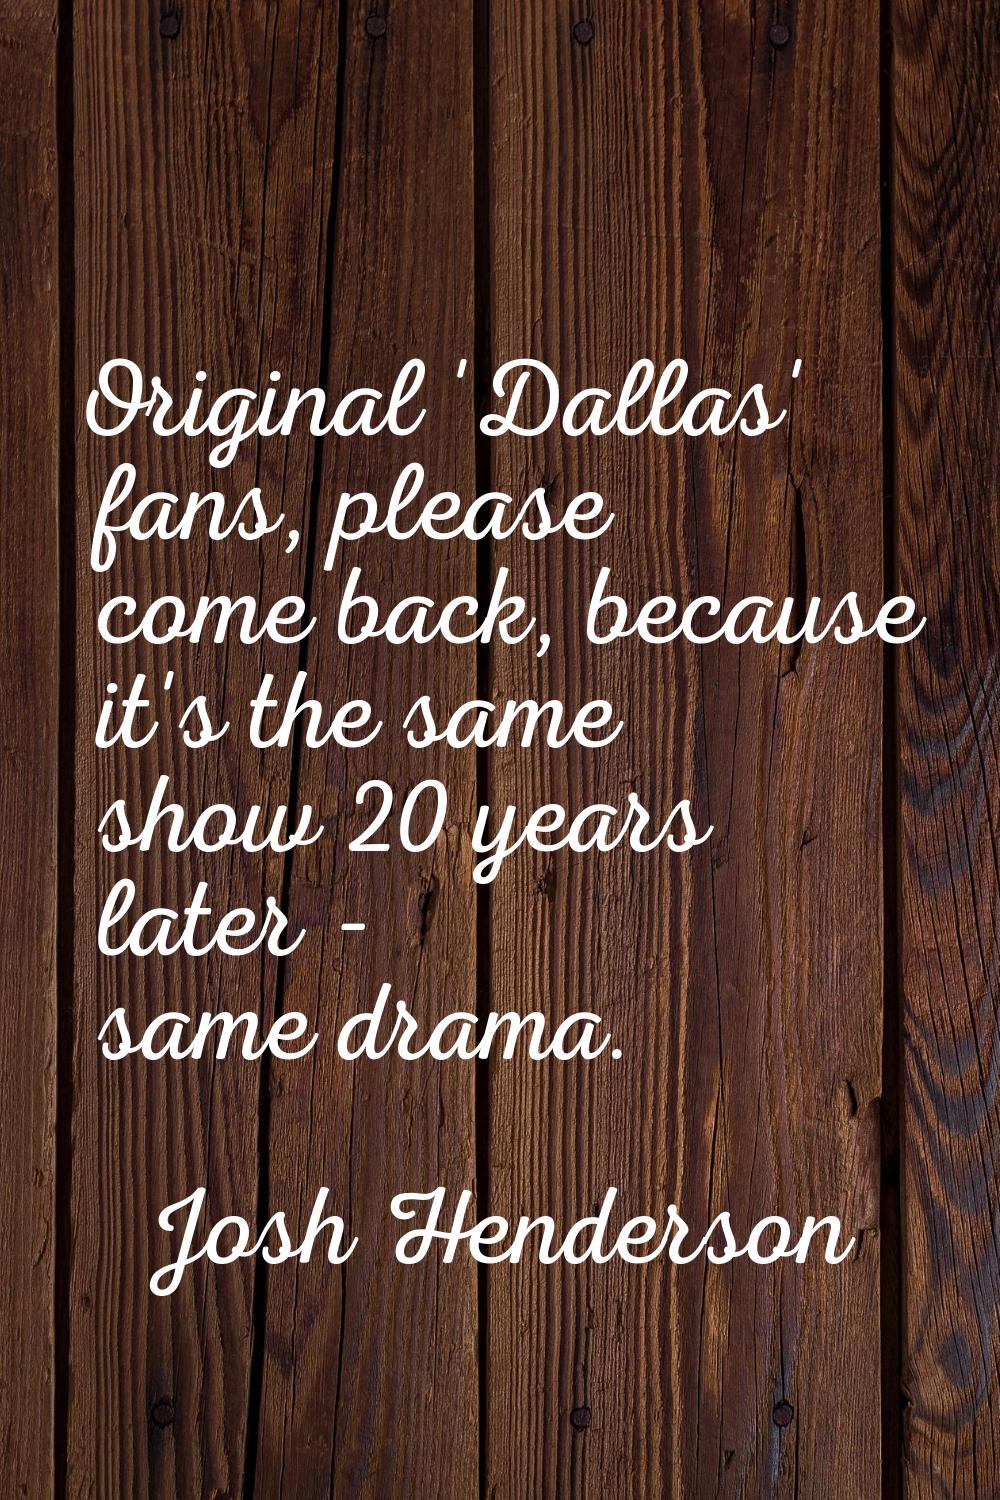 Original 'Dallas' fans, please come back, because it's the same show 20 years later - same drama.